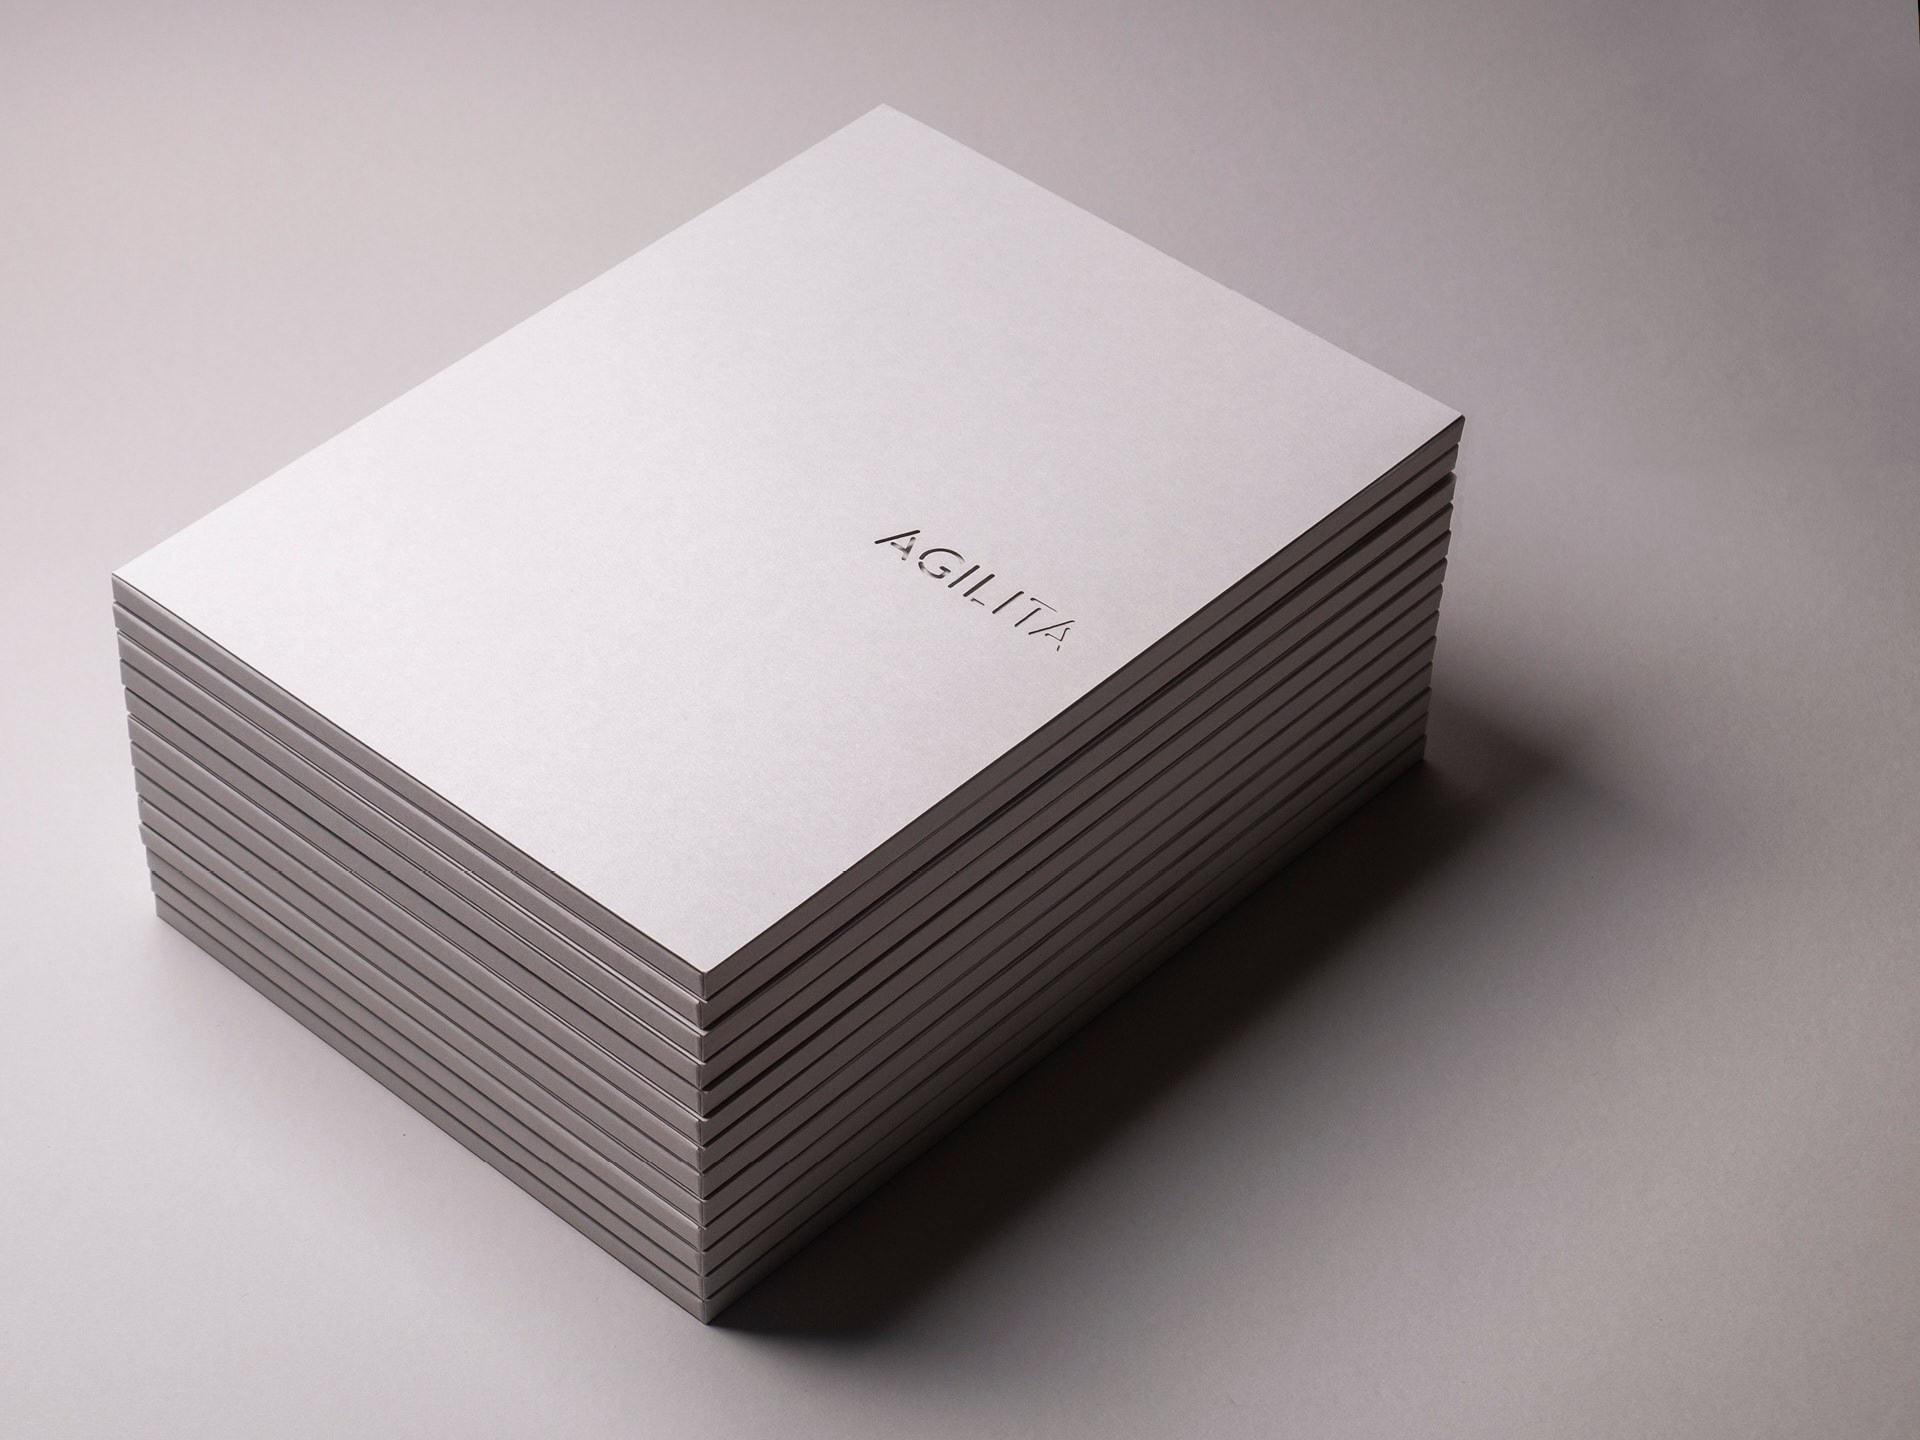 Several folders made using GF Smith Colorplan pale grey with the Agilita logotype die cut from the cover